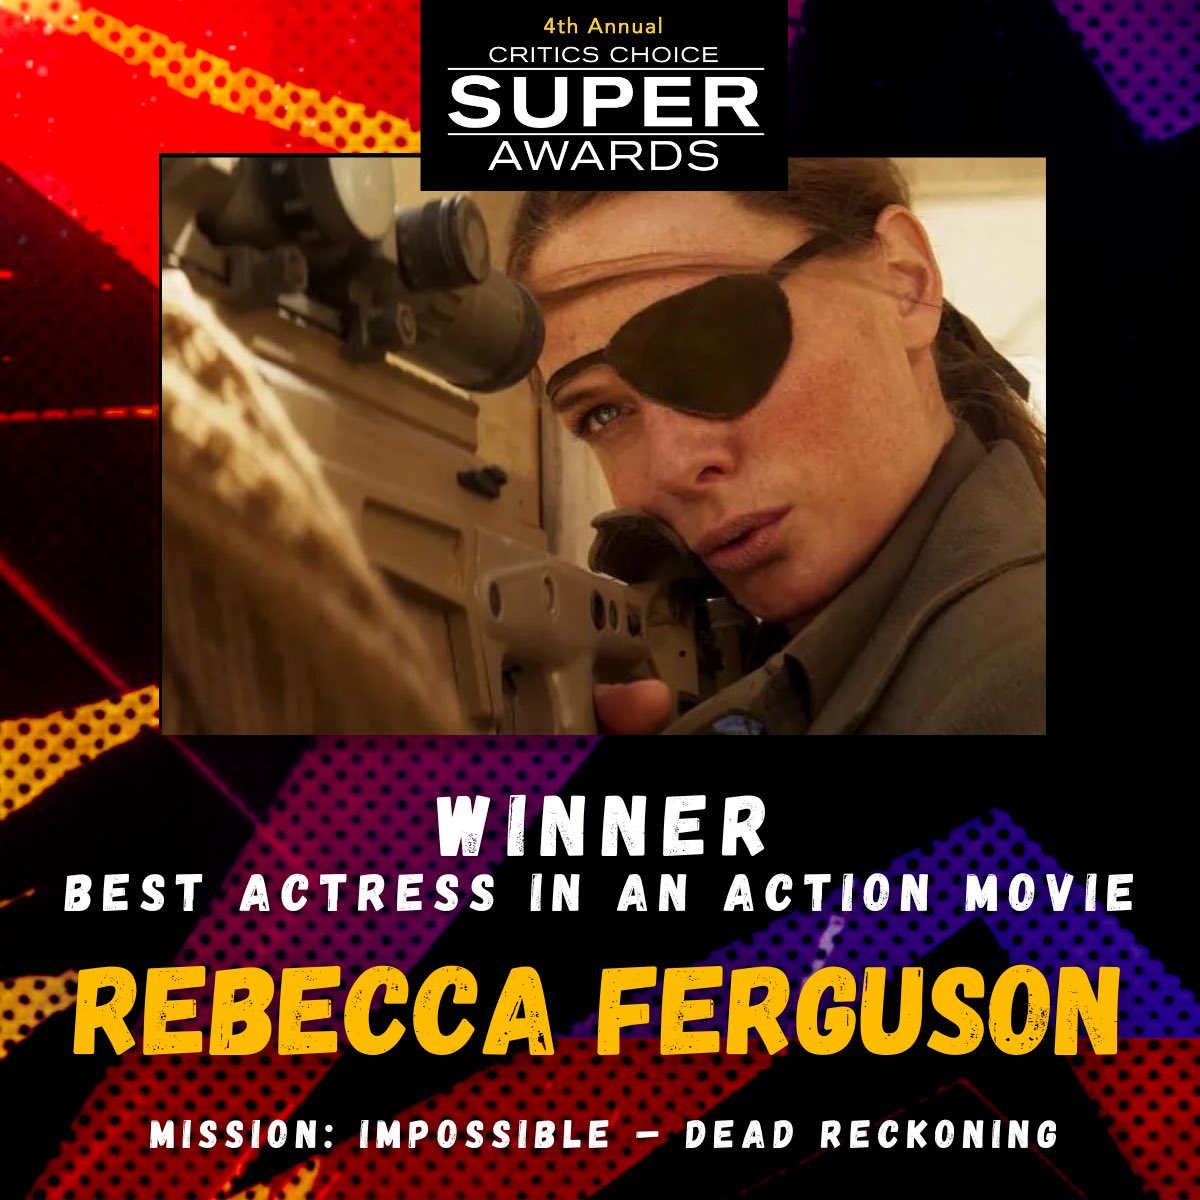 Congratulations to Rebecca Ferguson – “Mission: Impossible – Dead Reckoning!” The actress has won the Critics Choice SUPER AWARD for BEST ACTRESS IN AN ACTION MOVIE! ⭐️⭐️⭐️⭐️ #CCSuperAwards #RebeccaFerguson #MissionImpossible #CriticsChoice